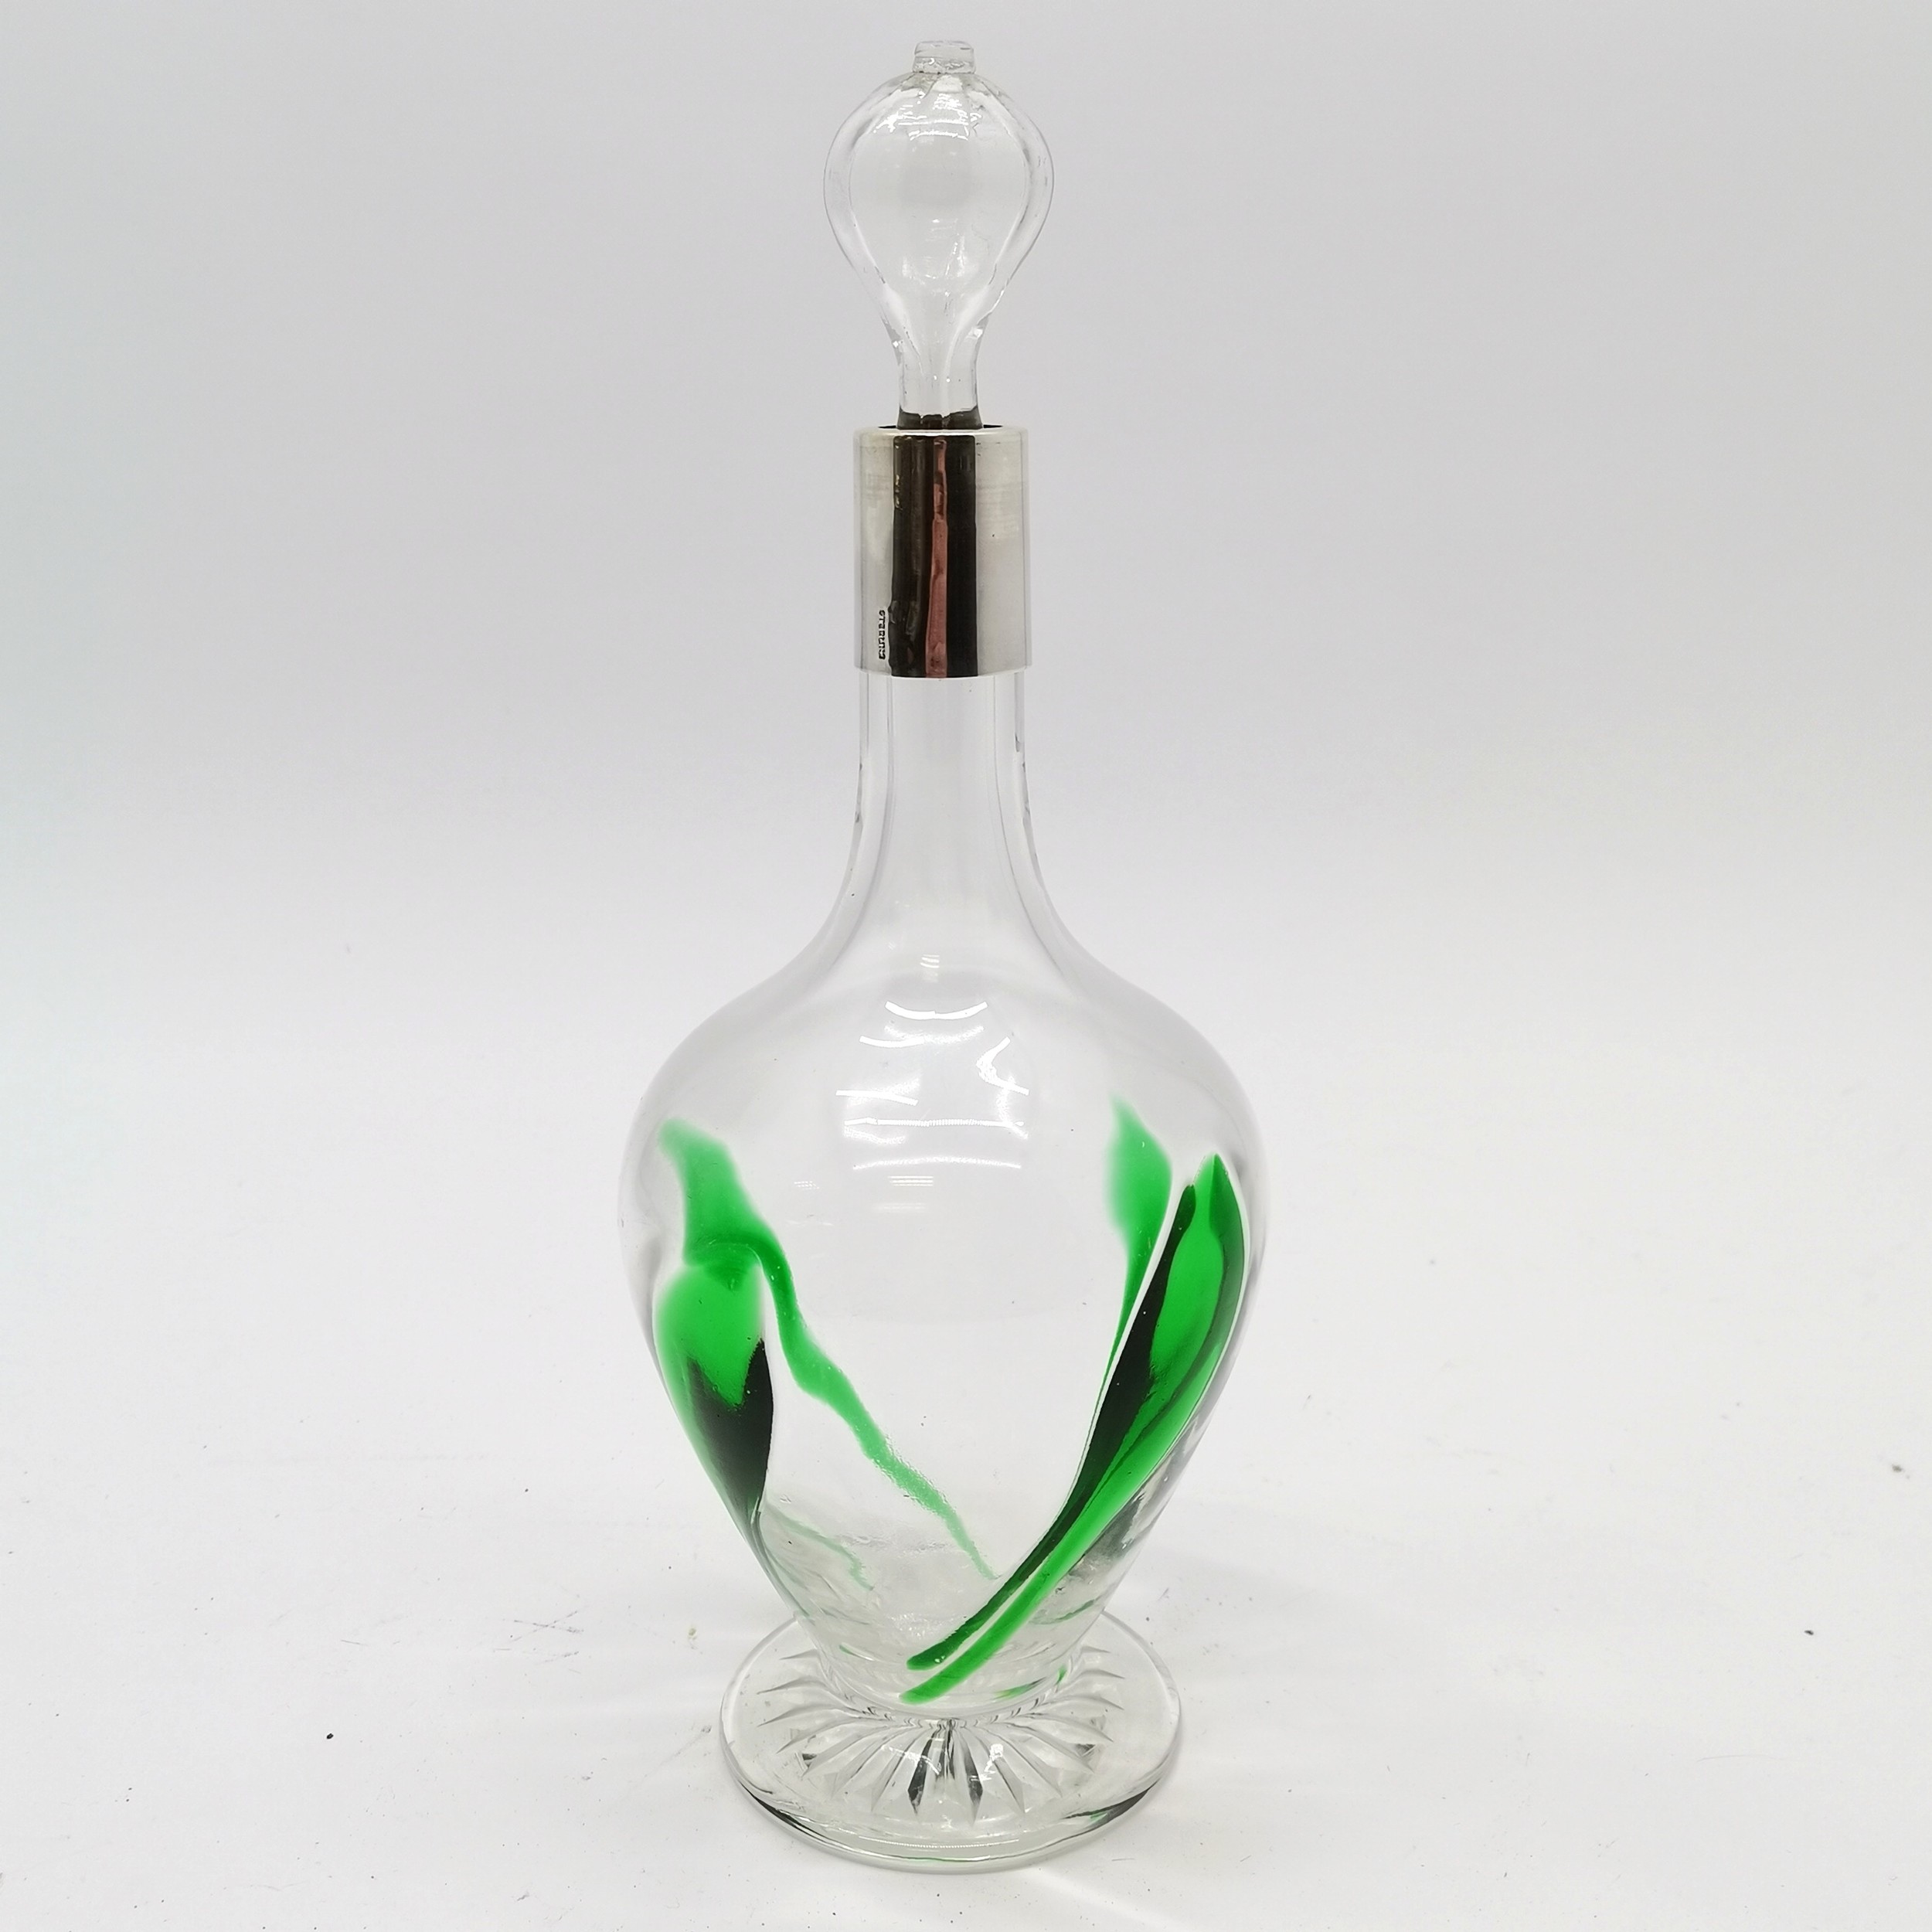 Sterling silver marked collar Art Nouveau glass decanter with green overlay swirl decoration, 30cm - Image 2 of 4